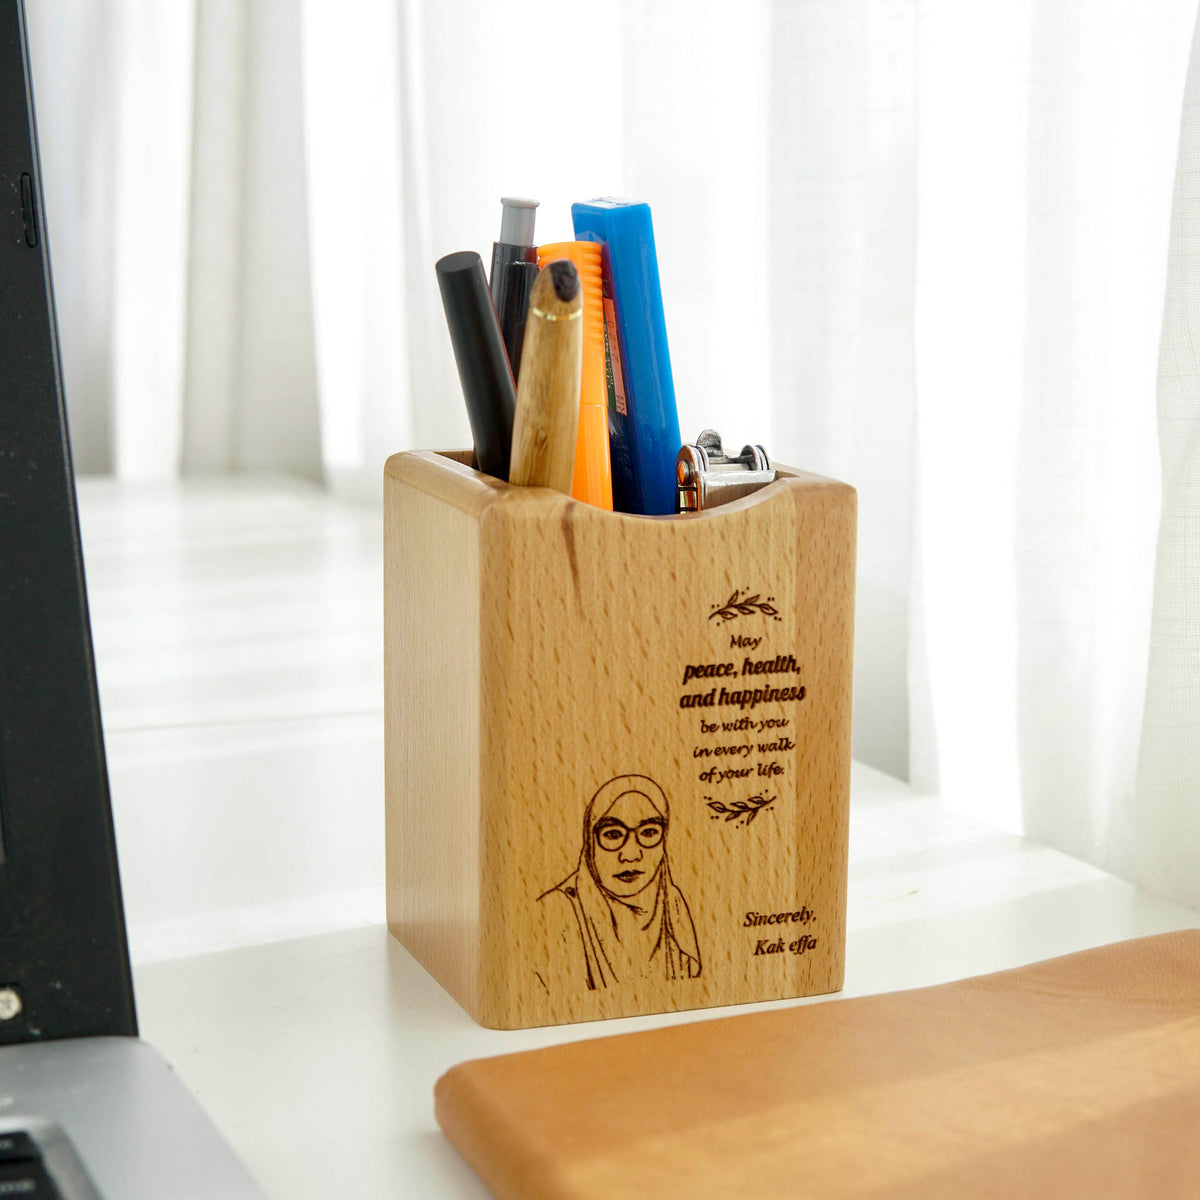 Custom Engraved Pen/Pencil Holder – Customized With Your Personalized Text